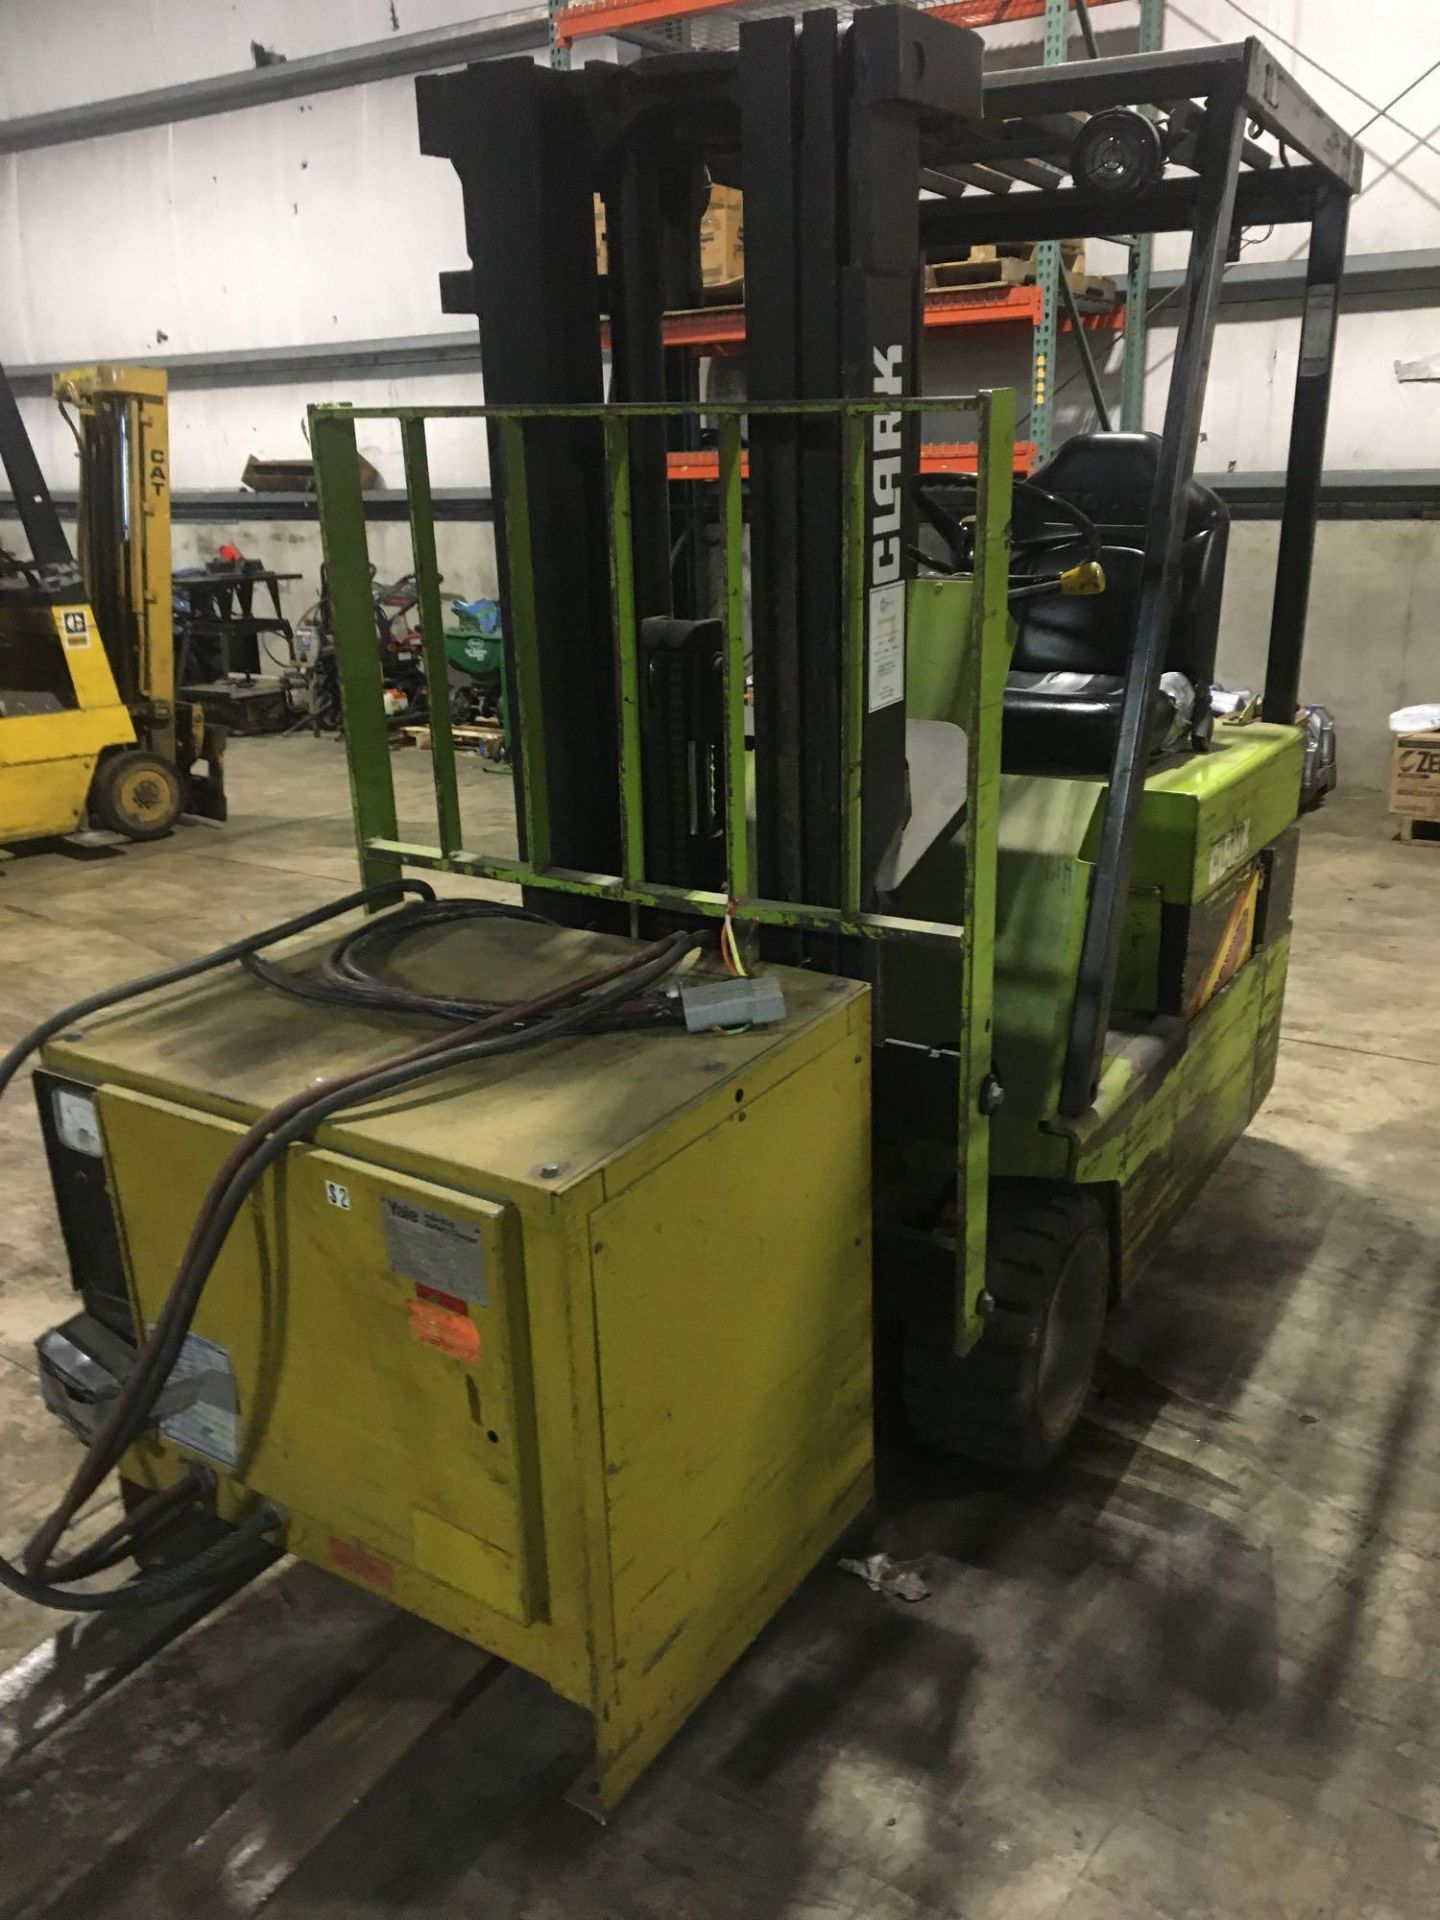 Electric Forklift, Clark, TM20, Max Ht 170", Max Cap 3425lbs, Hrs Unknown - Image 4 of 8